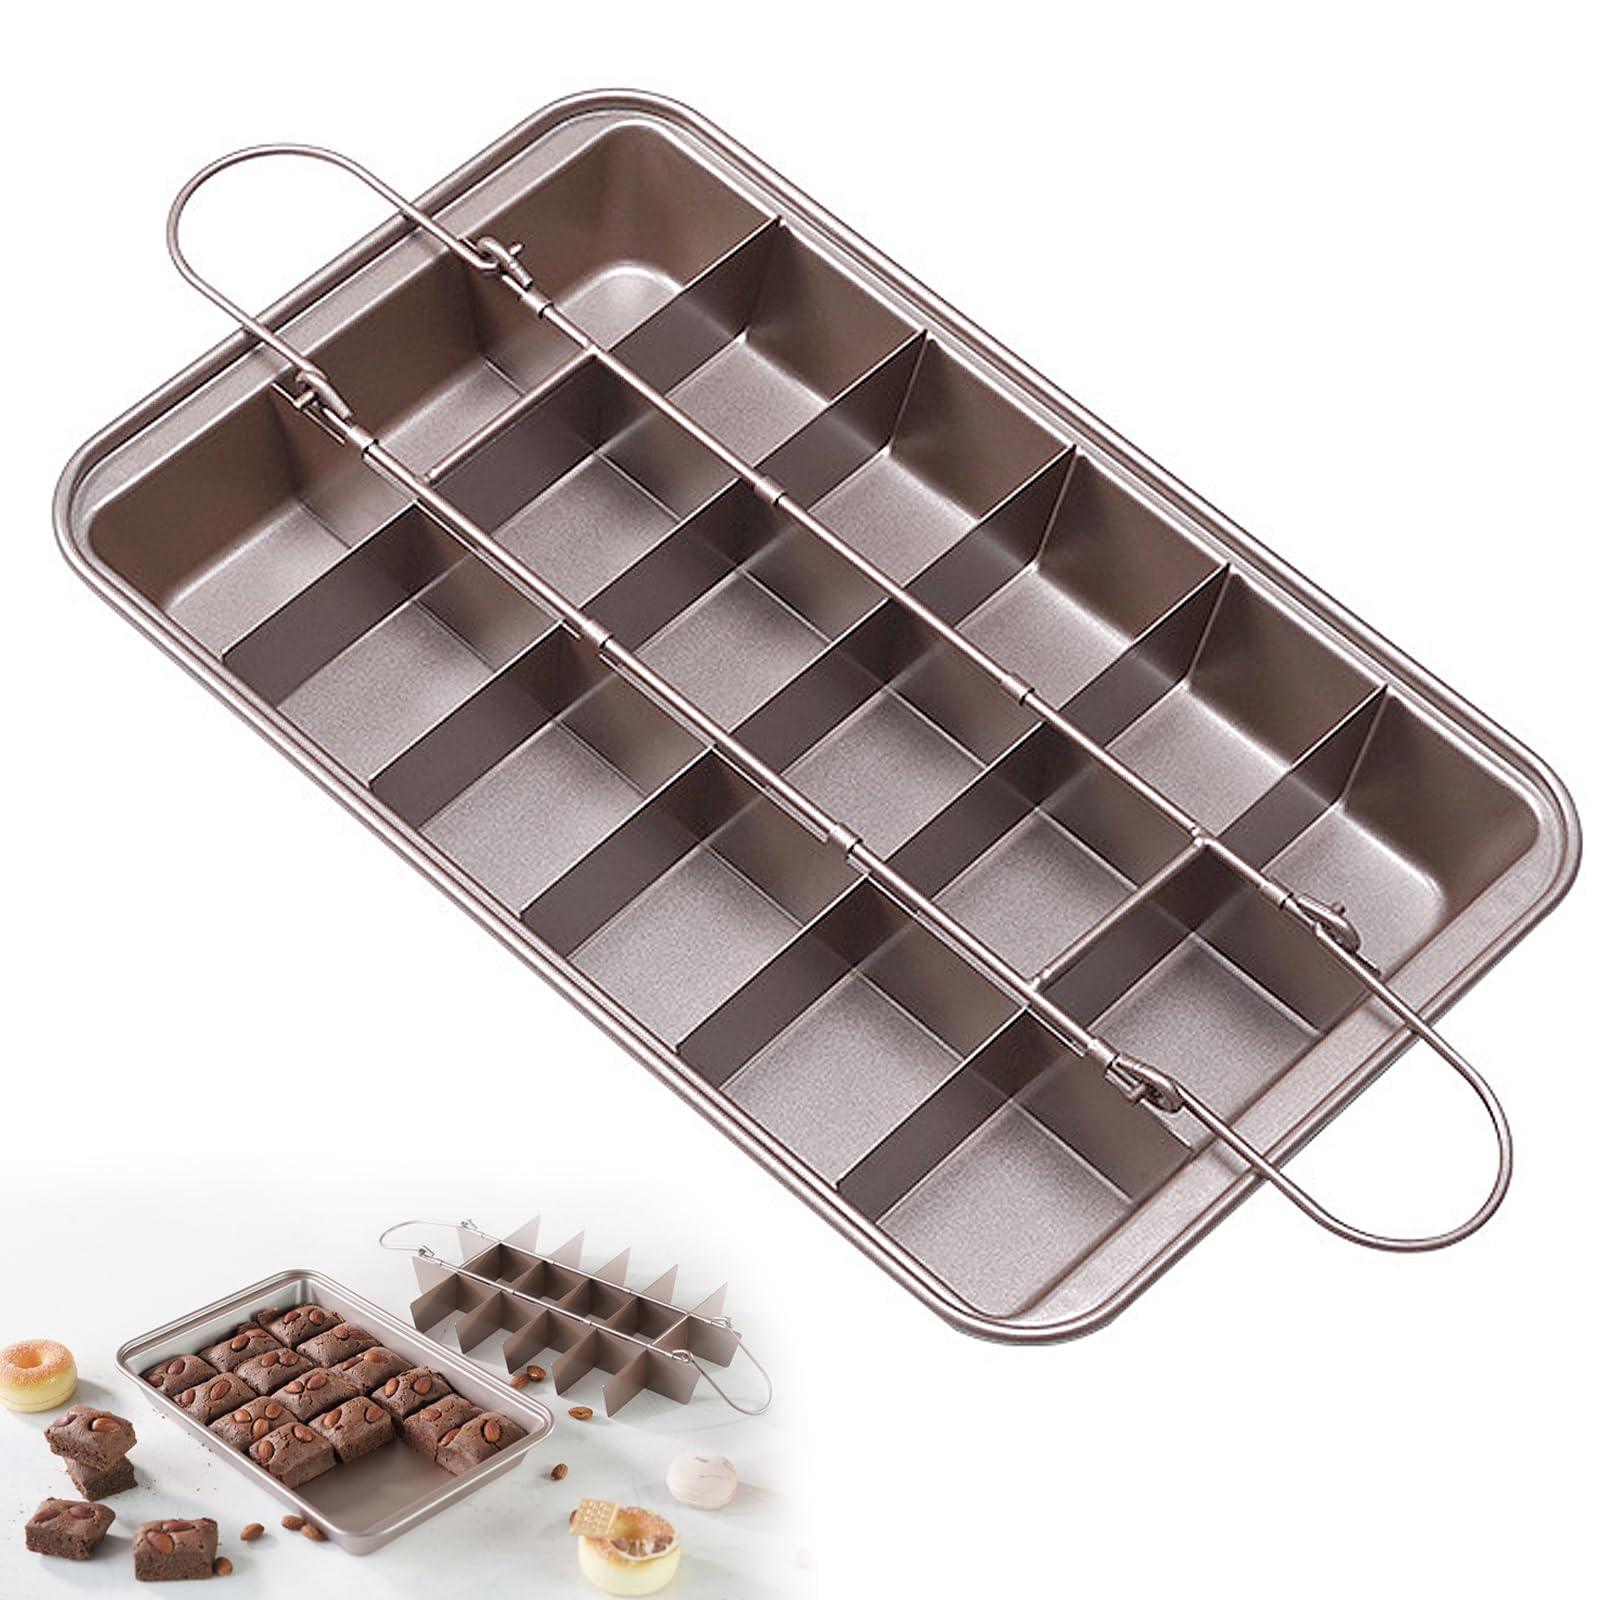 Kundalini Brownie Pan Nonstick Baking Pan with Built-In Slicer,It Can Make Brownie Bite,Cake,Fudges and Chocolate(Champagne Gold) - CookCave